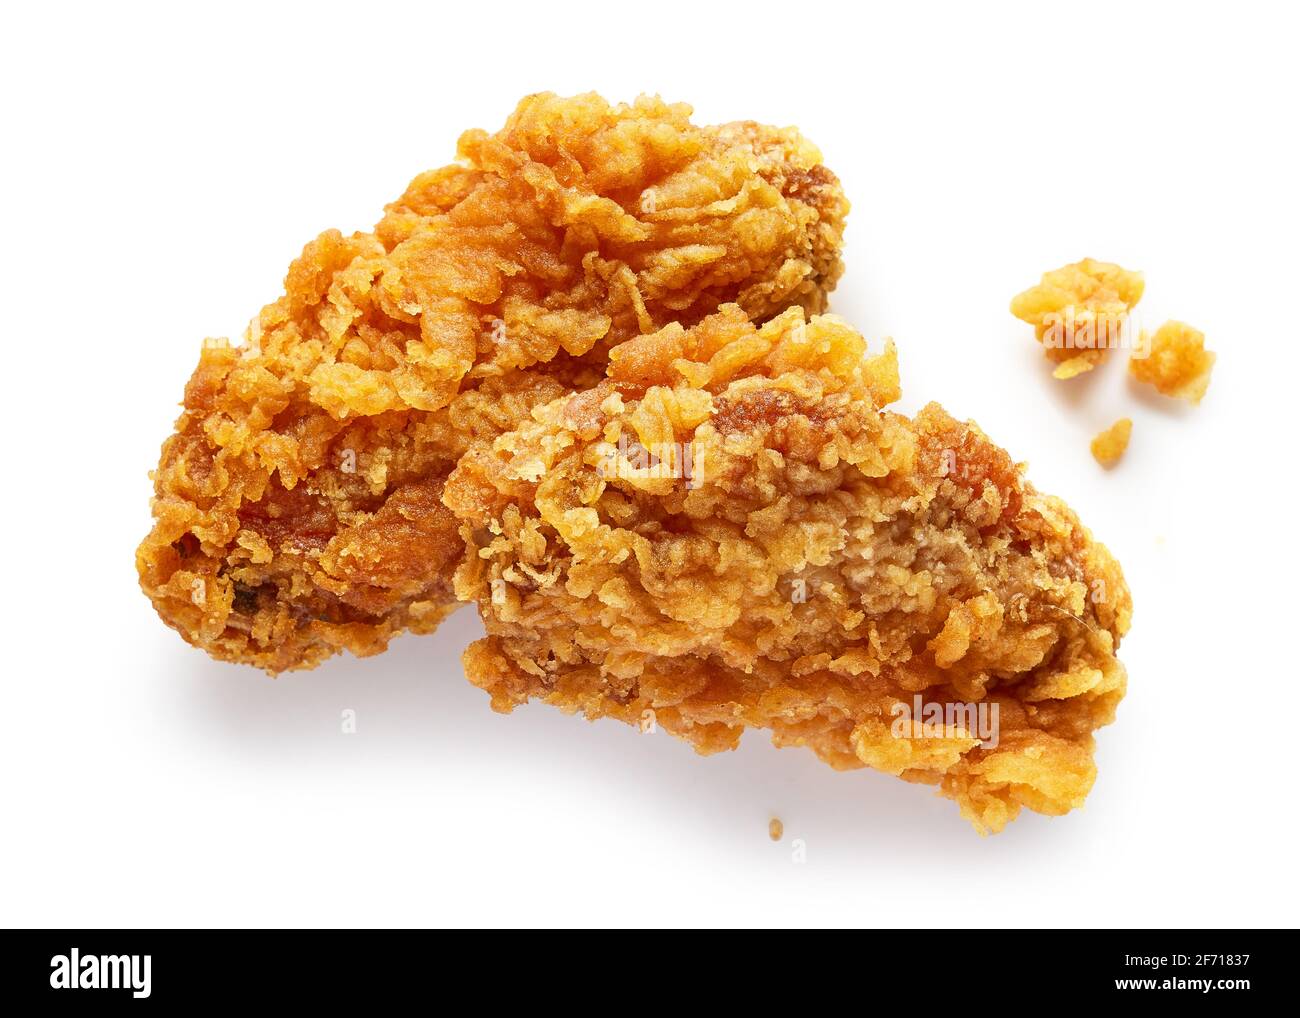 fried breaded chicken wings isolated on white background, top view Stock Photo